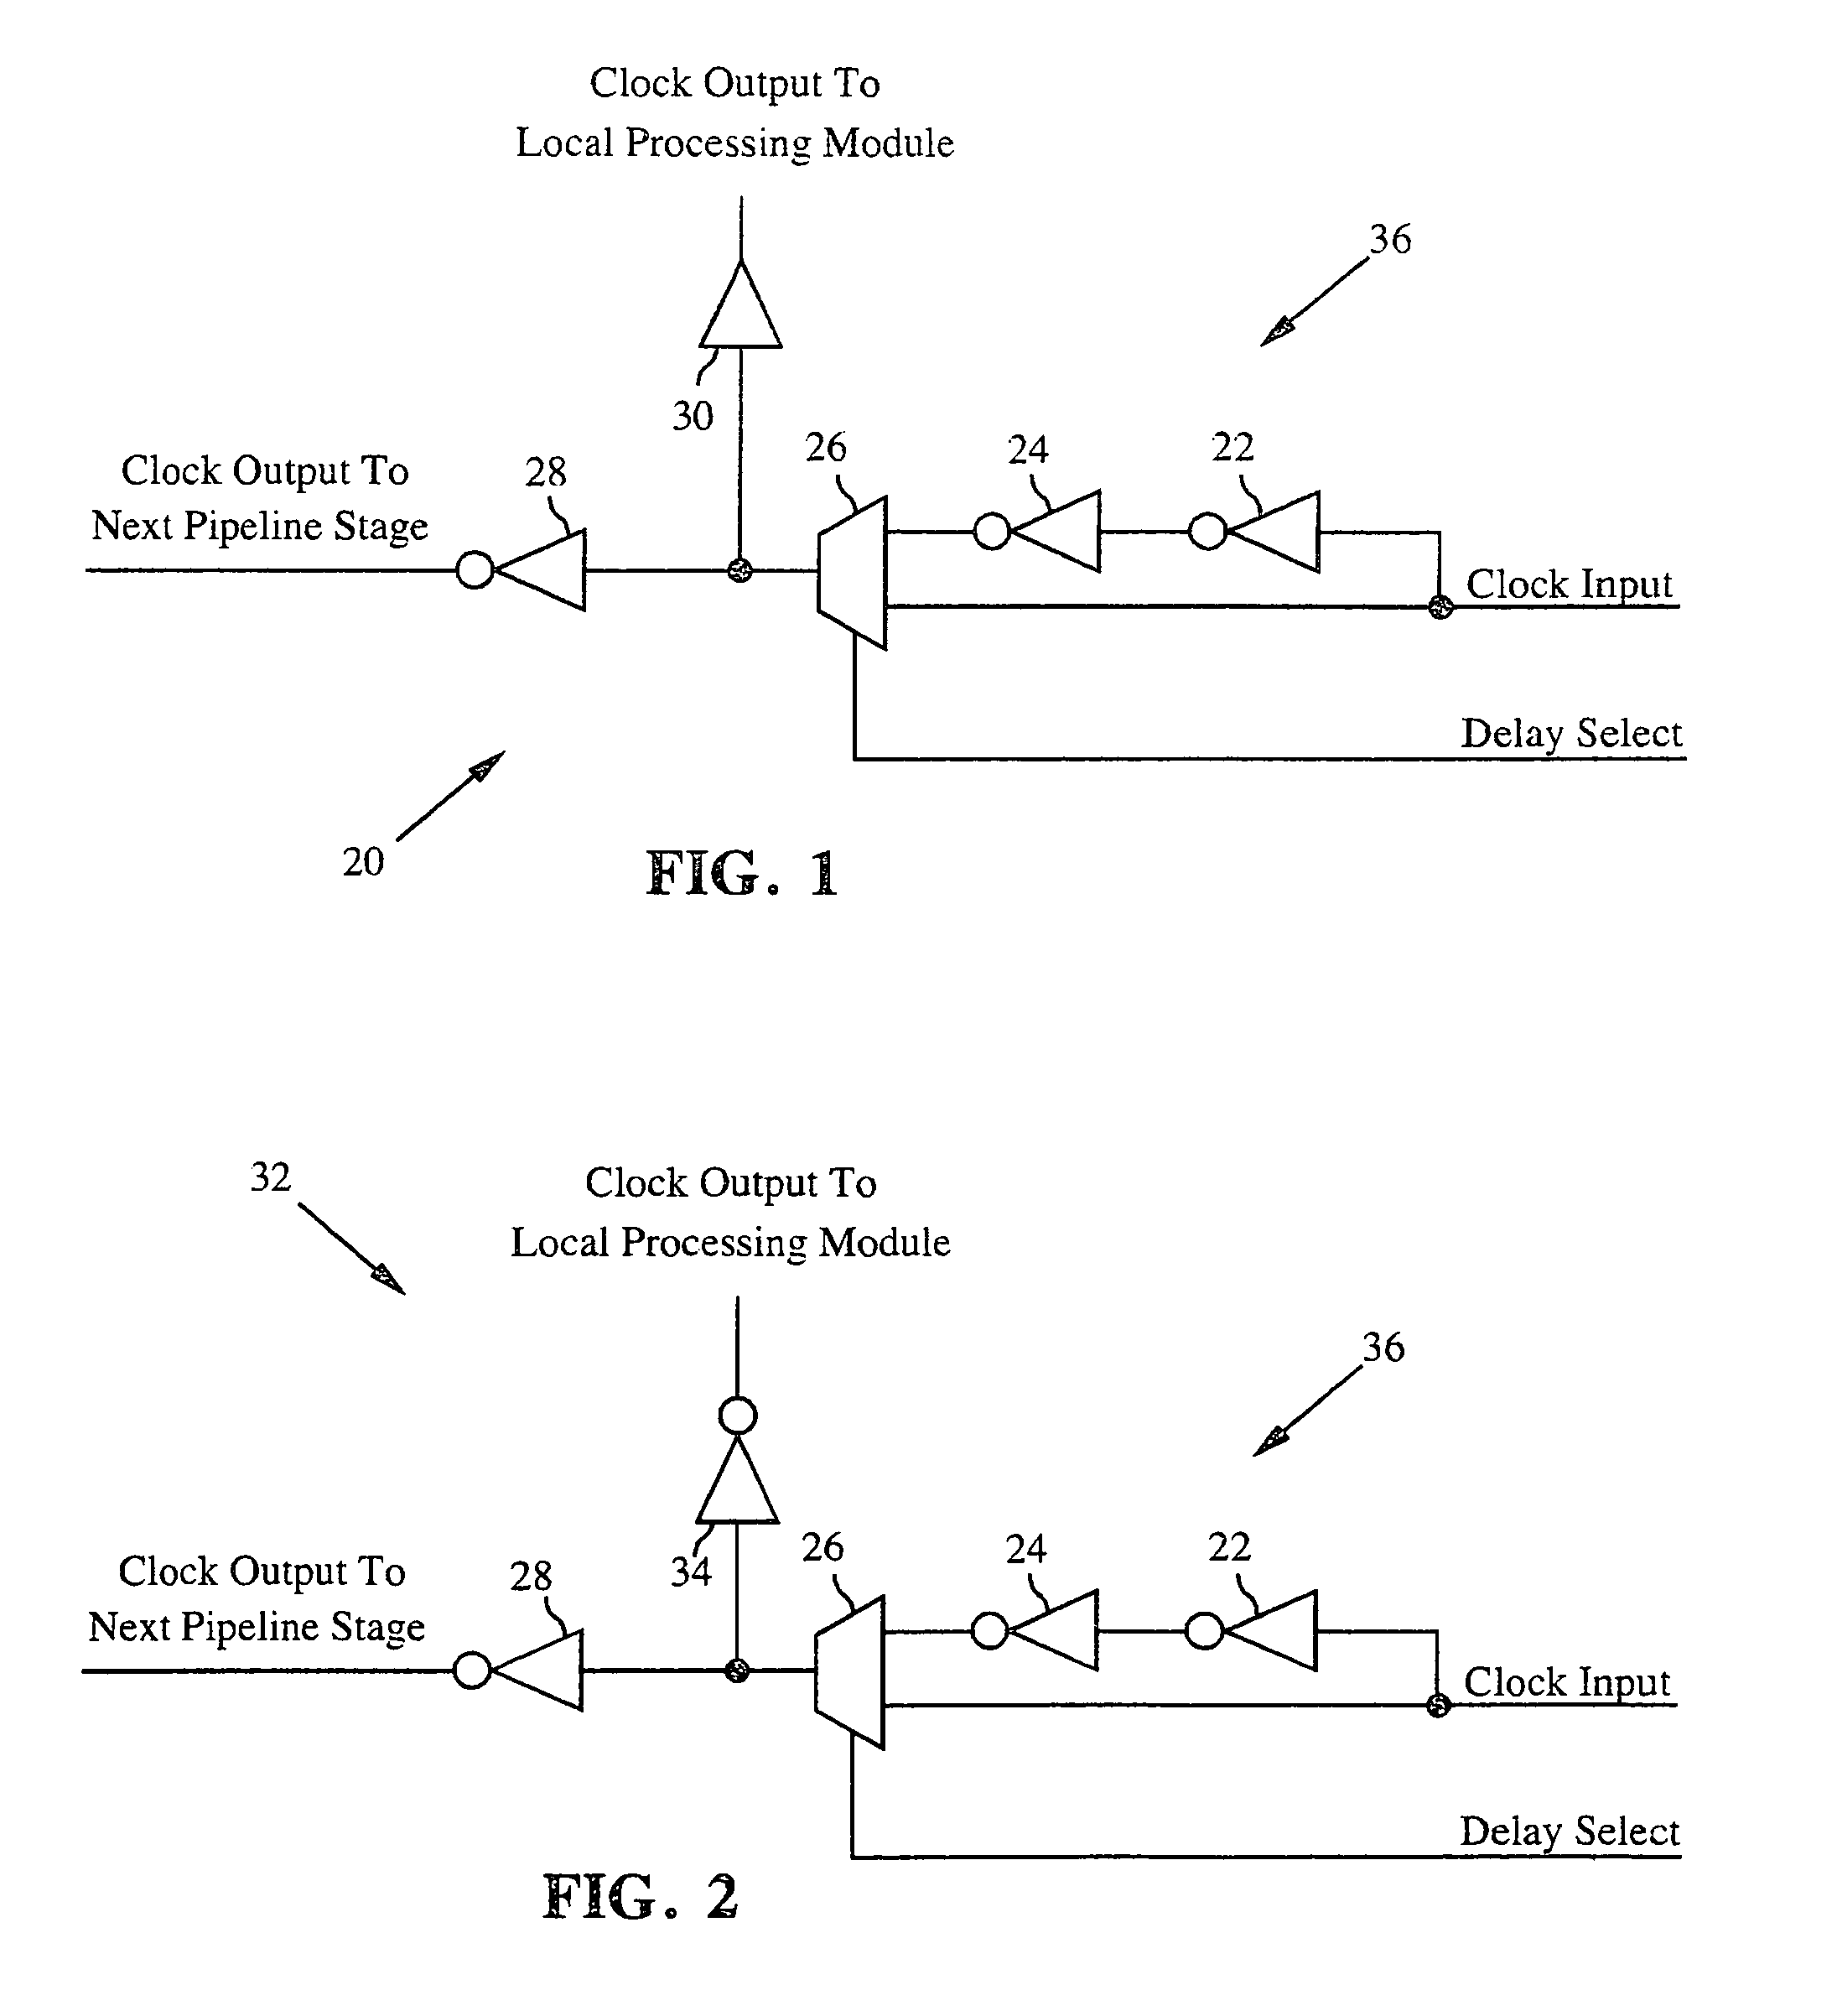 Automatic clock synchronization and distribution circuit for counter clock flow pipelined systems